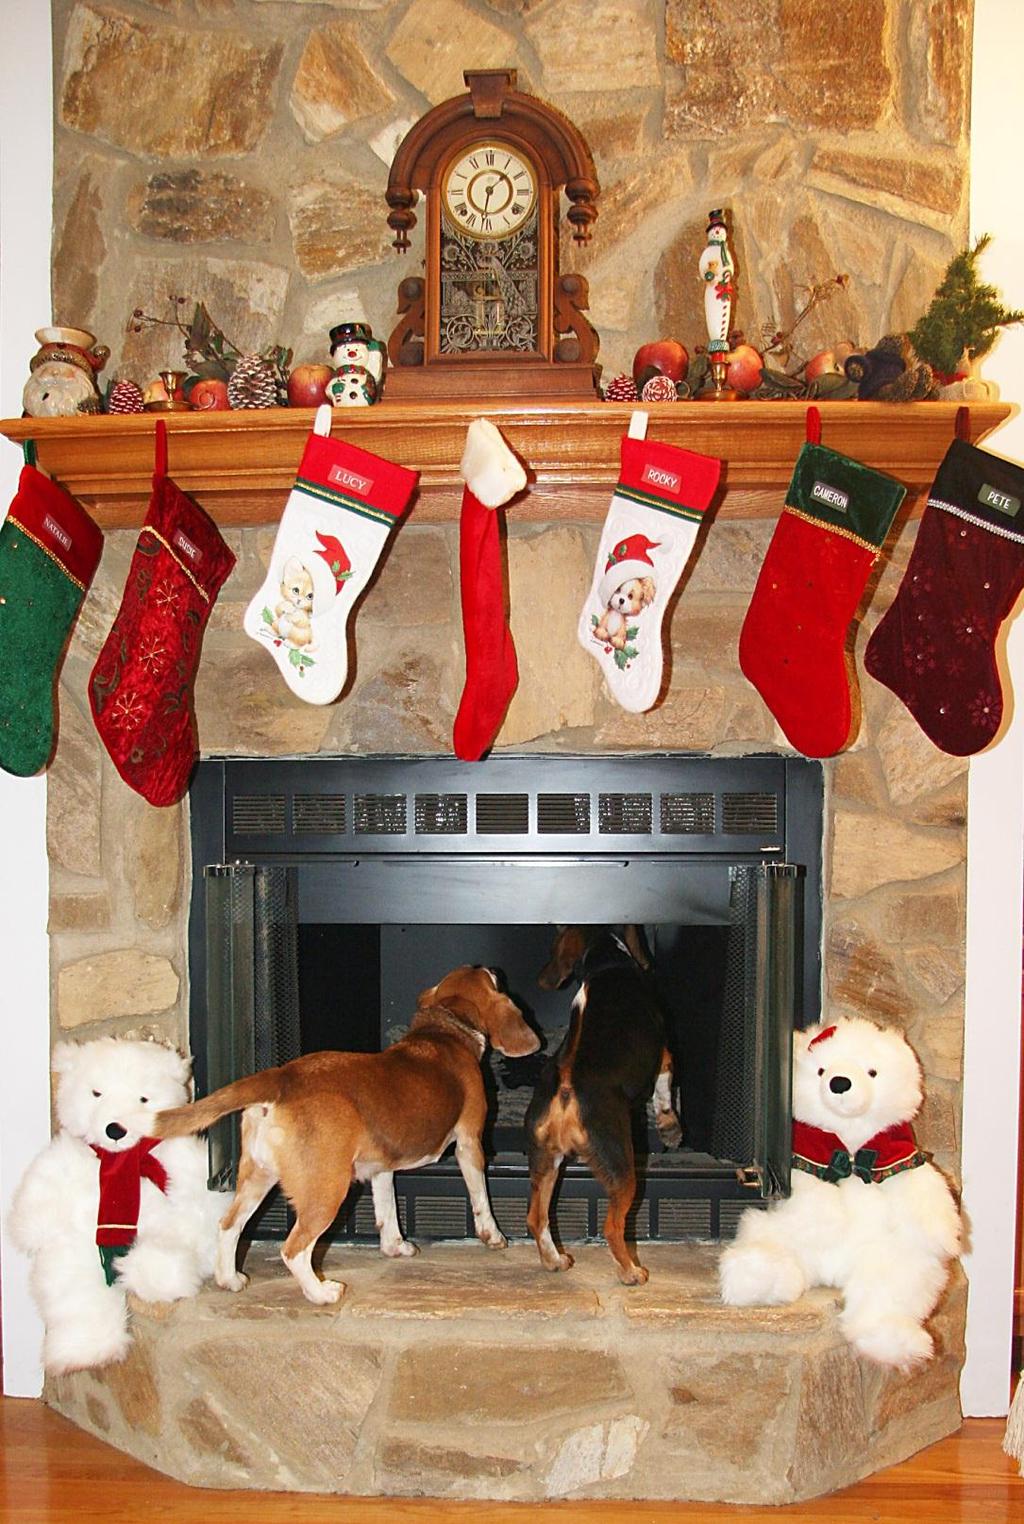 PAUSE FOR PAWS Winter 2013 Volume 6 Issue 1 A lot of dogs have bigger problems than just waiting for Santa to come.